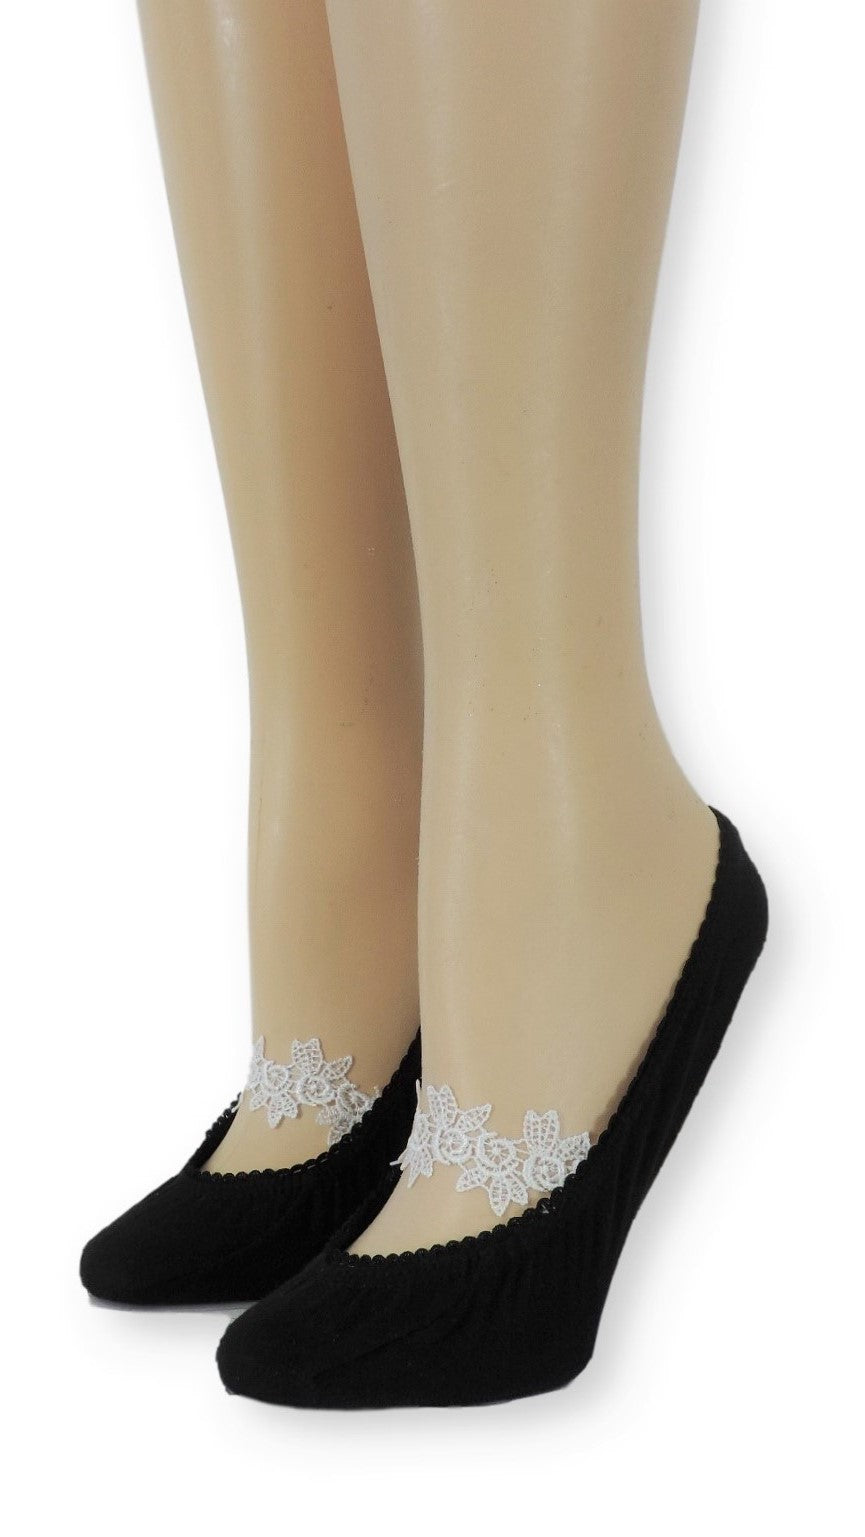 Ankle Socks with White Flower Lace - Global Trendz Fashion®